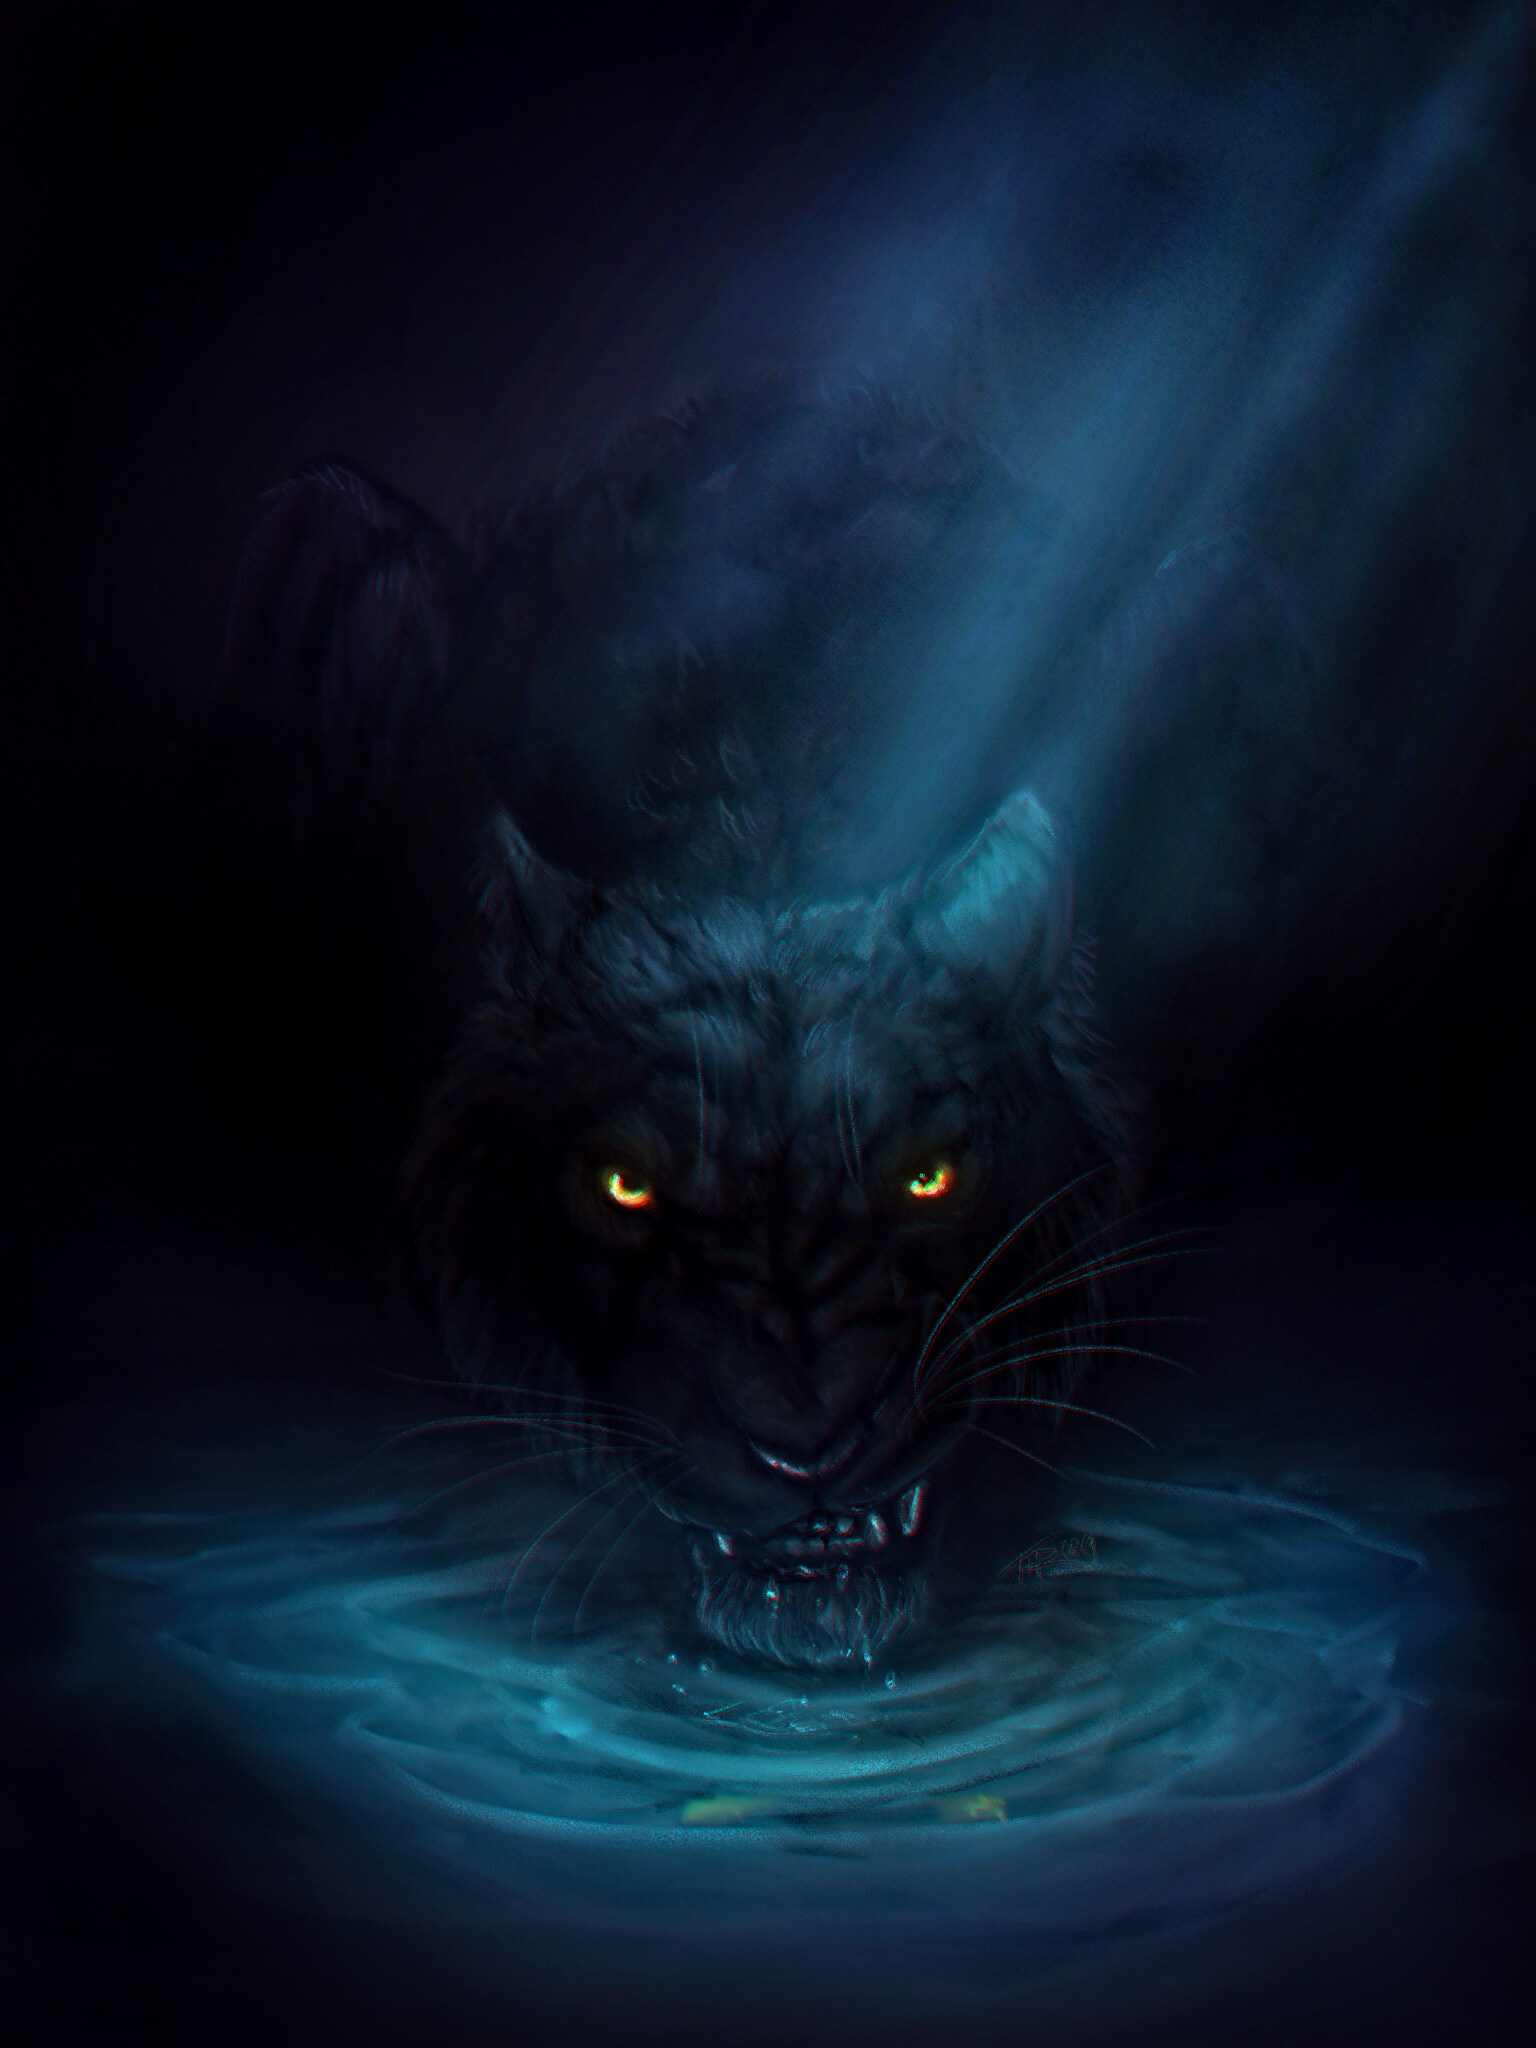 Download wallpaper 1536x2048 panther, grin, big cat, black, water hd  background